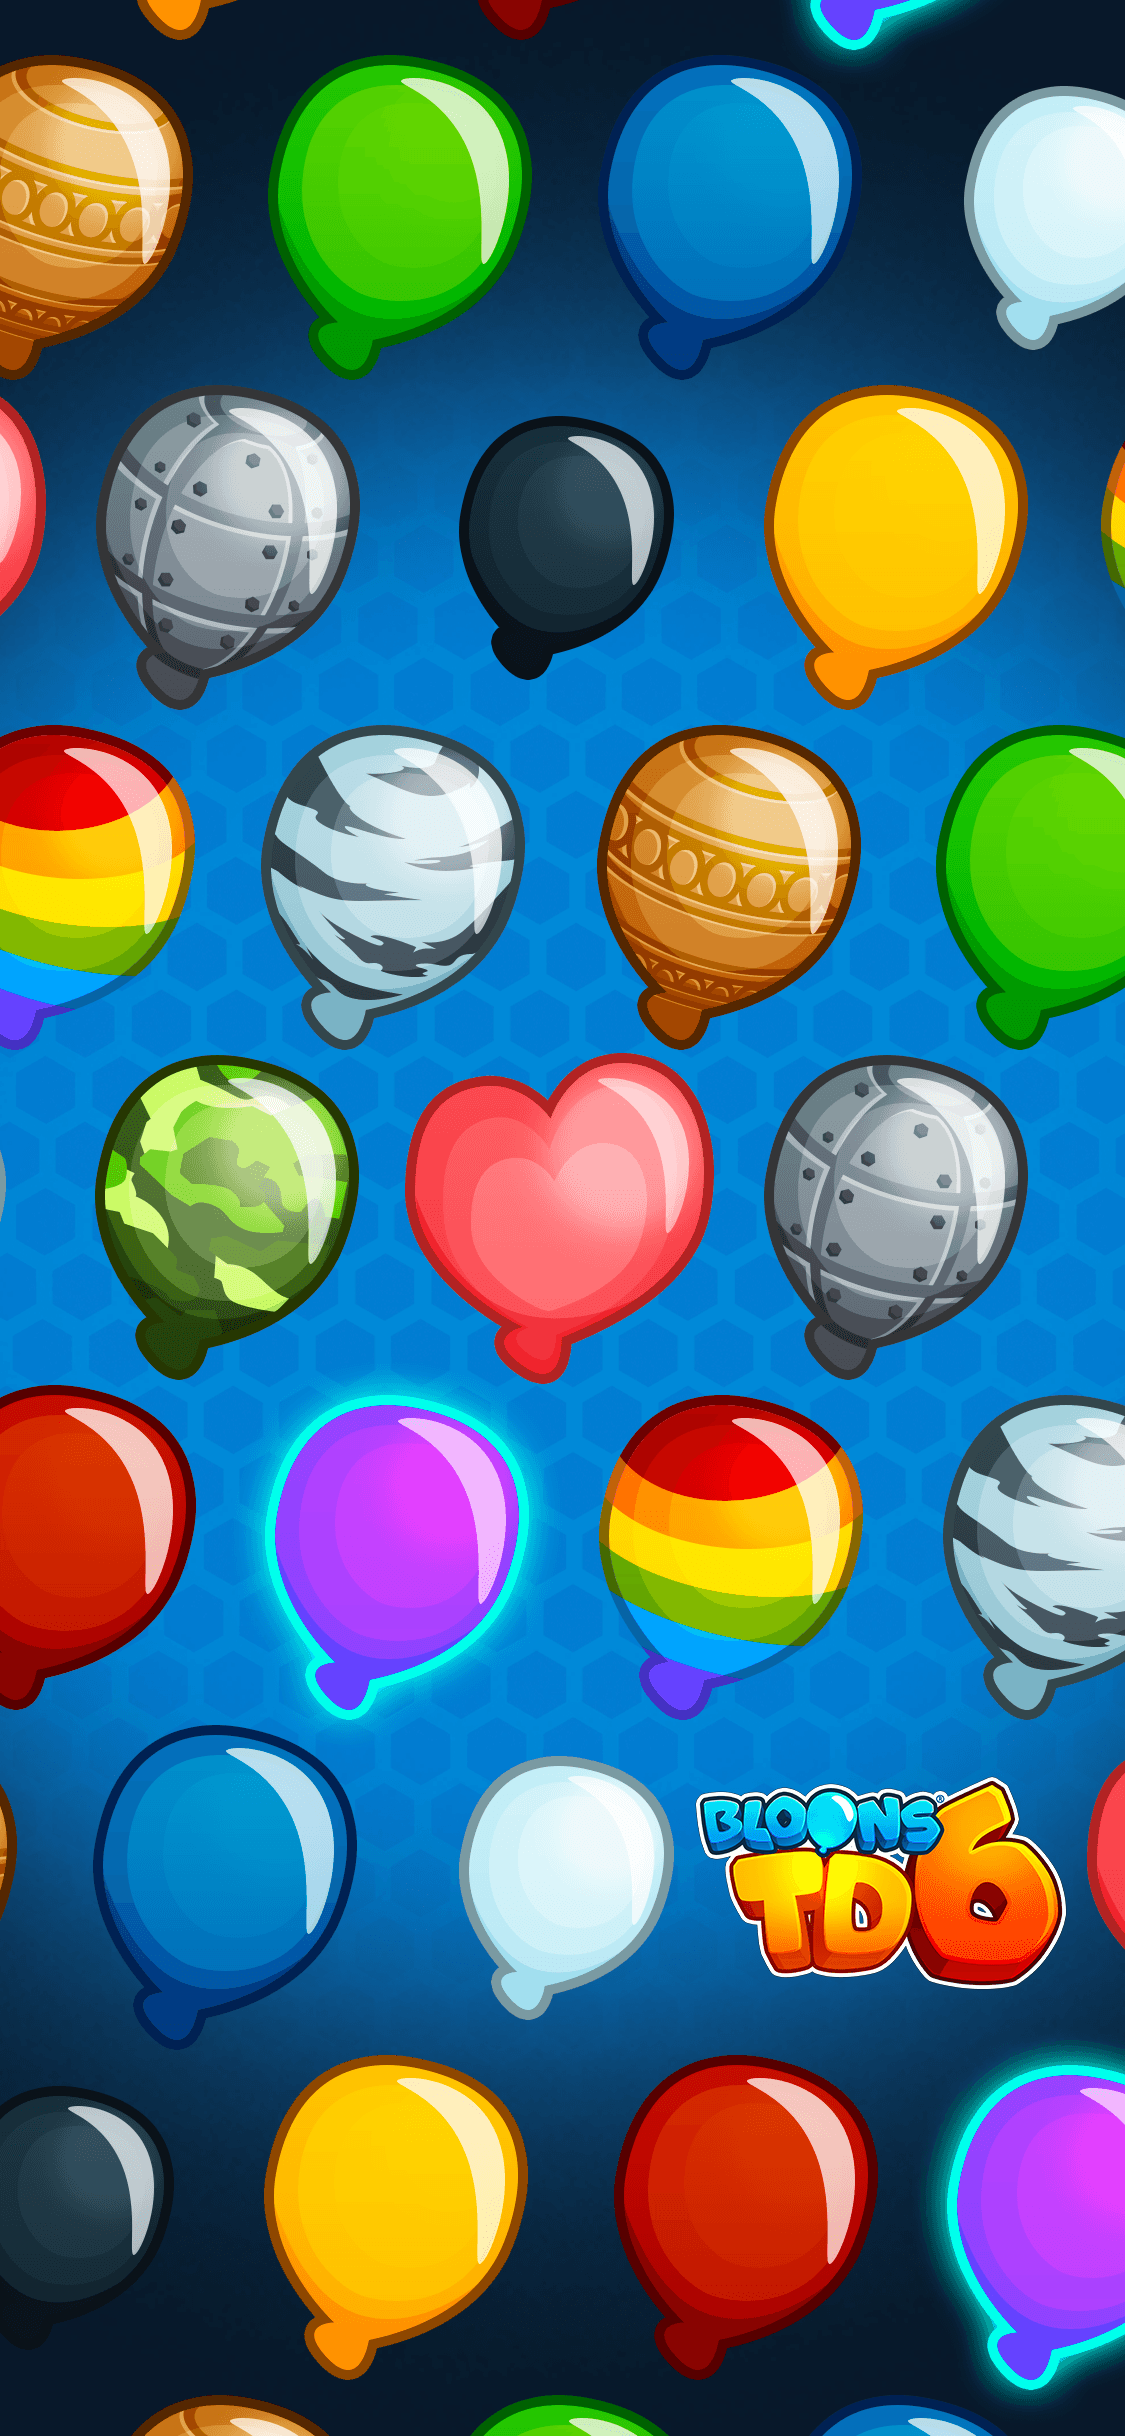 bloon td 6